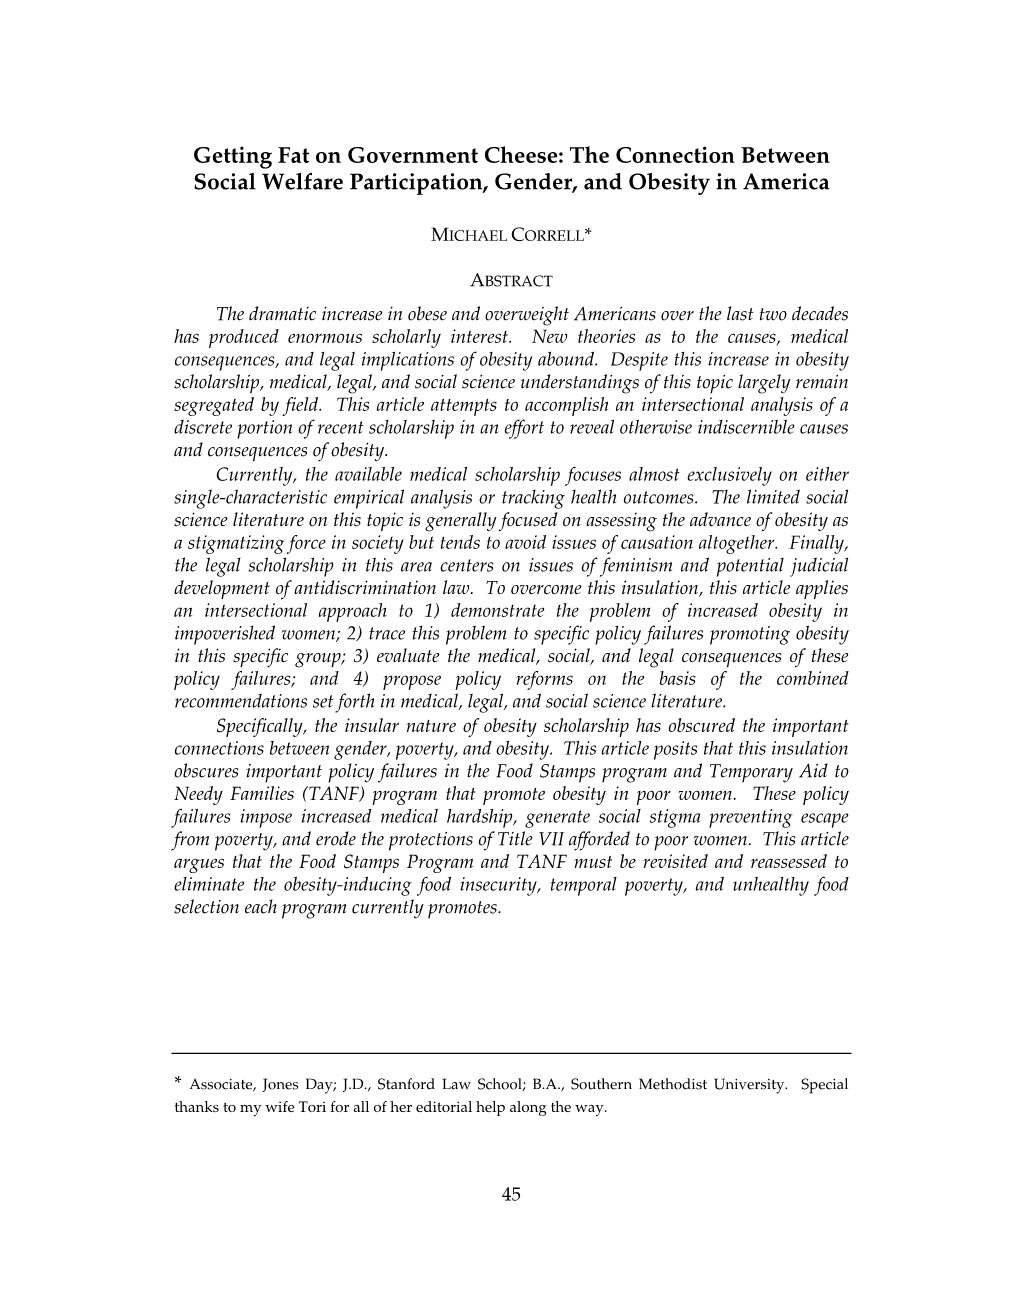 Getting Fat on Government Cheese: the Connection Between Social Welfare Participation, Gender, and Obesity in America